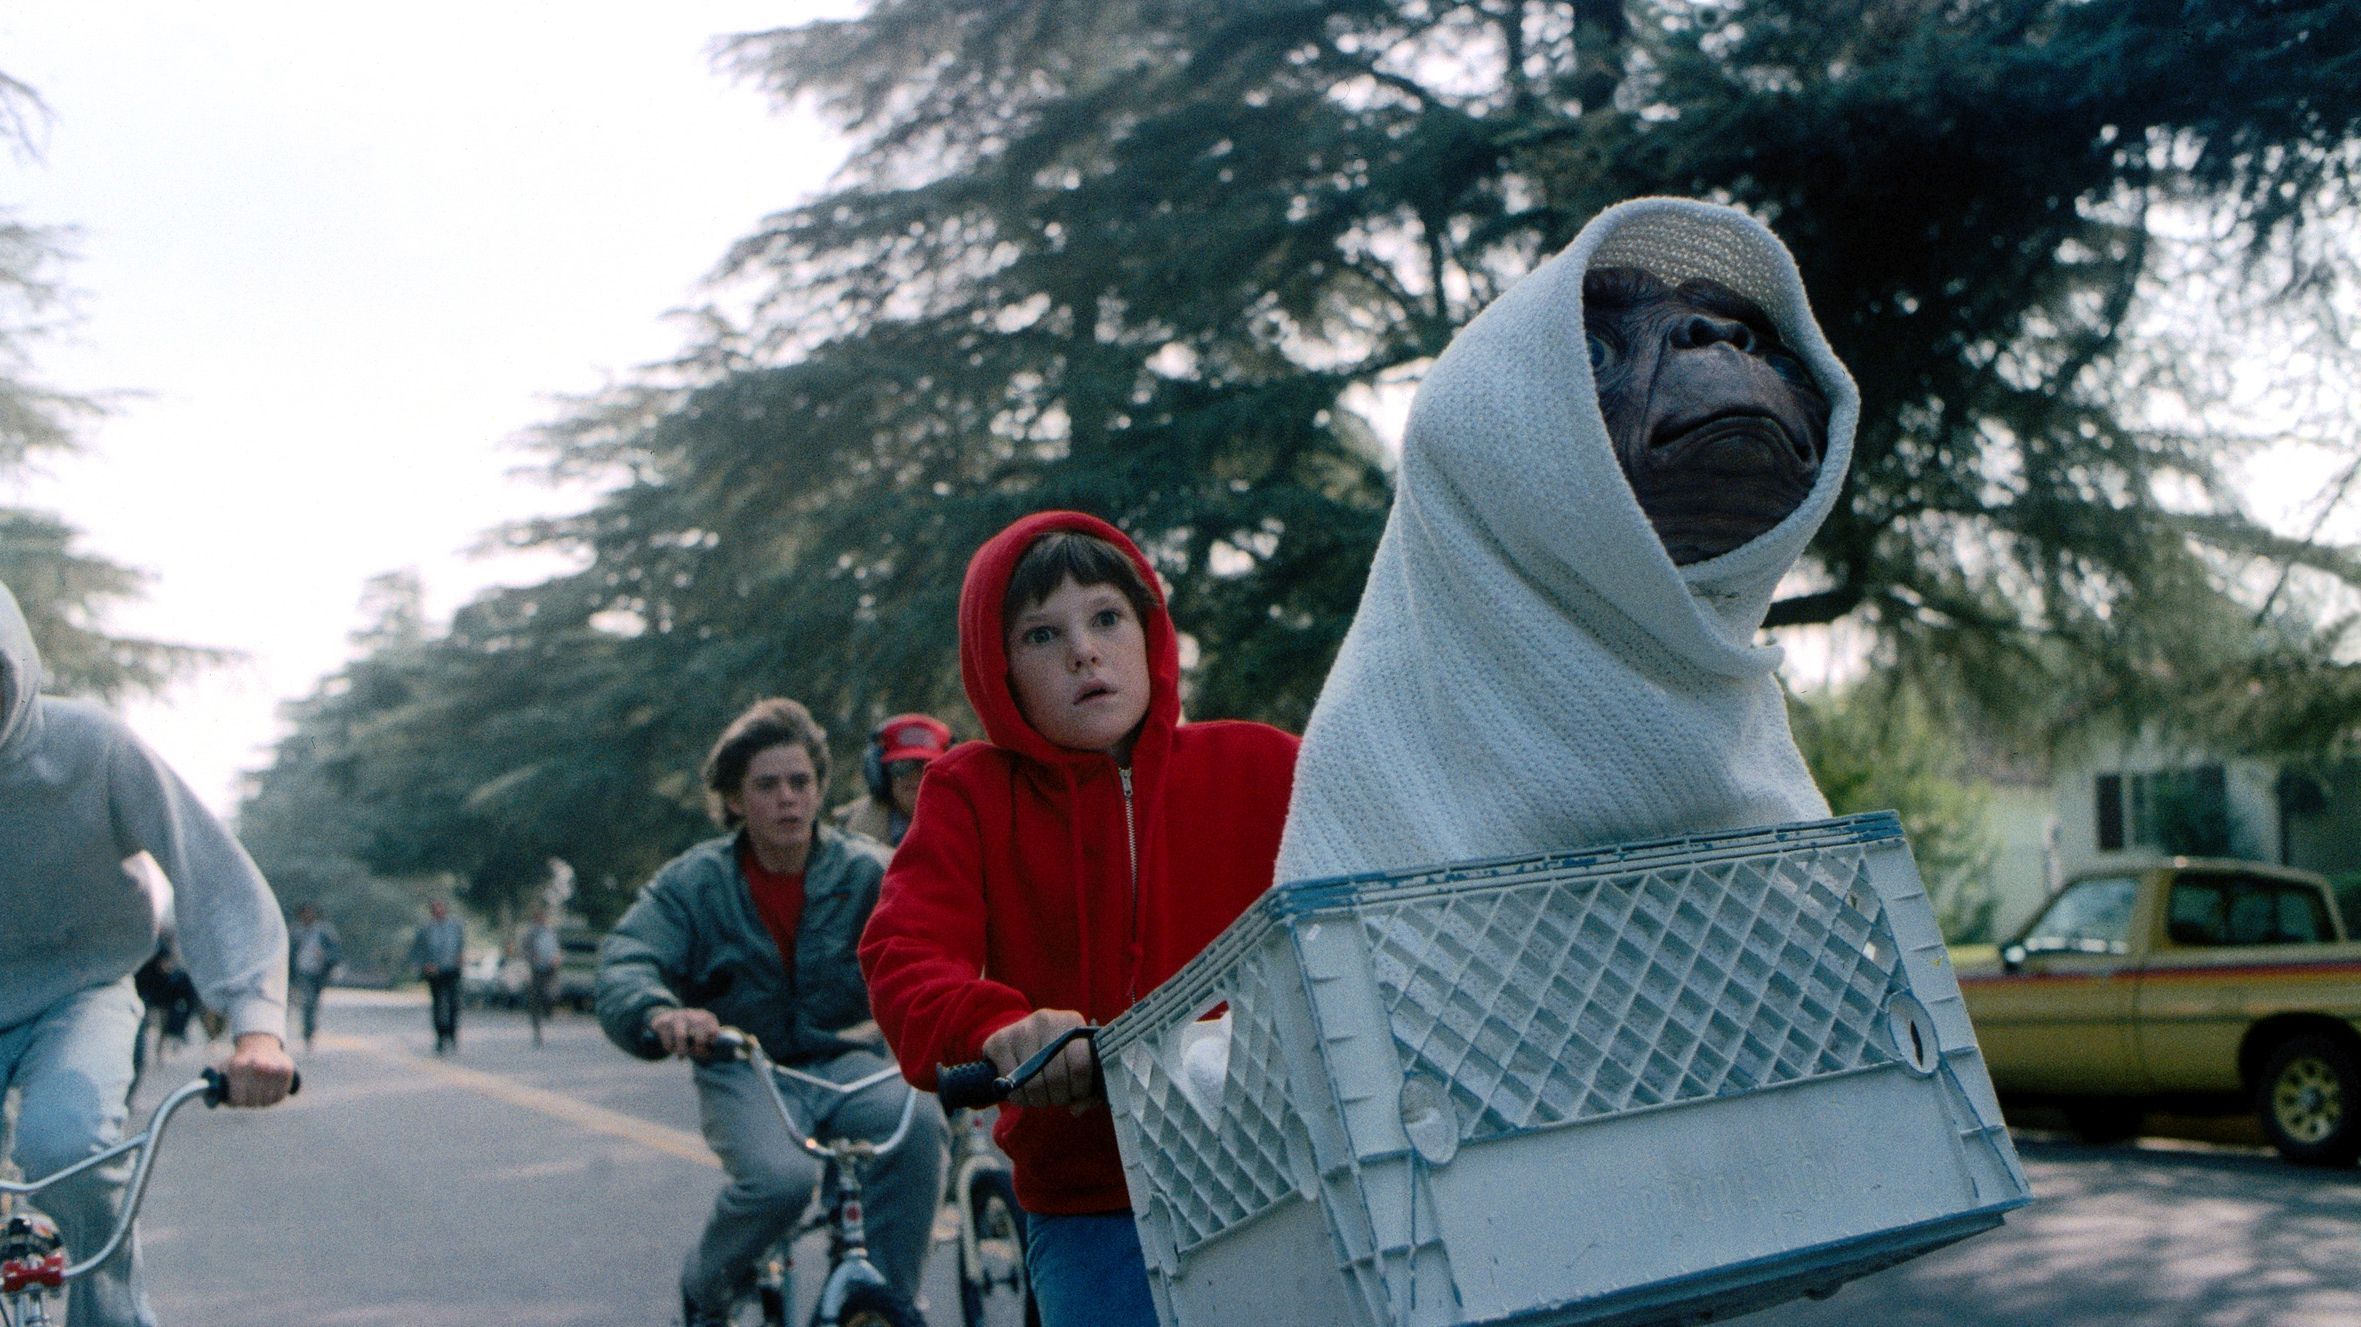 A boy in a red hoody is riding his bike and in his front basket is an alien wrapped in a blanket.